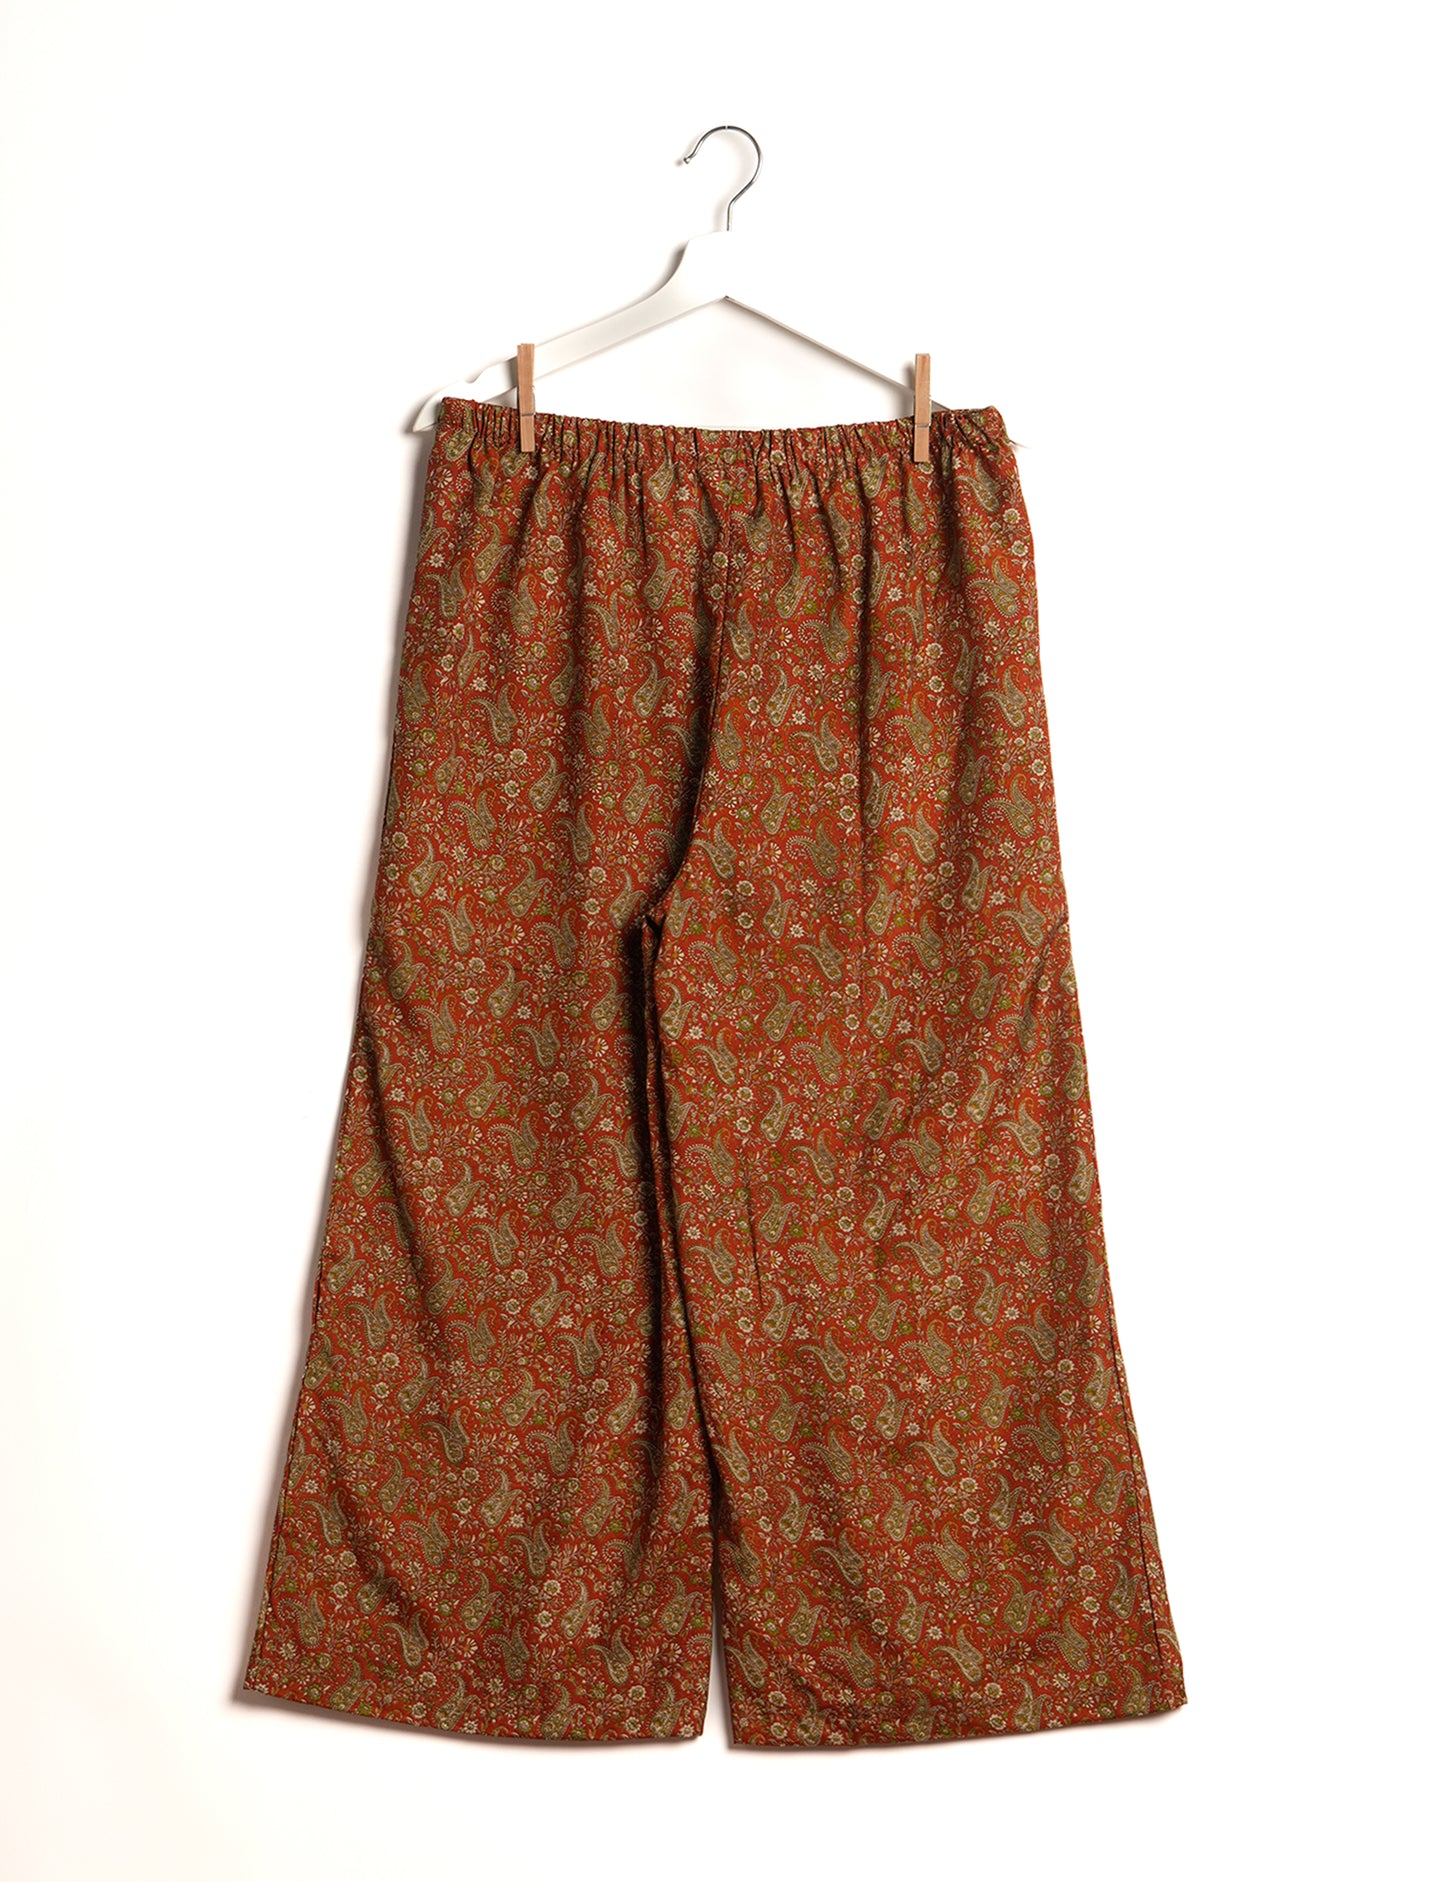 Step into sustainable fashion with our Palazzo Pants – a harmonious blend of Indian and Italian influences. These wide-legged pants, made from upcycled saris, offer comfort with an all-around elastic waist and a stylish flared leg. Make a statement with eco-friendly, chic palazzo pants that redefine ethical clothing.